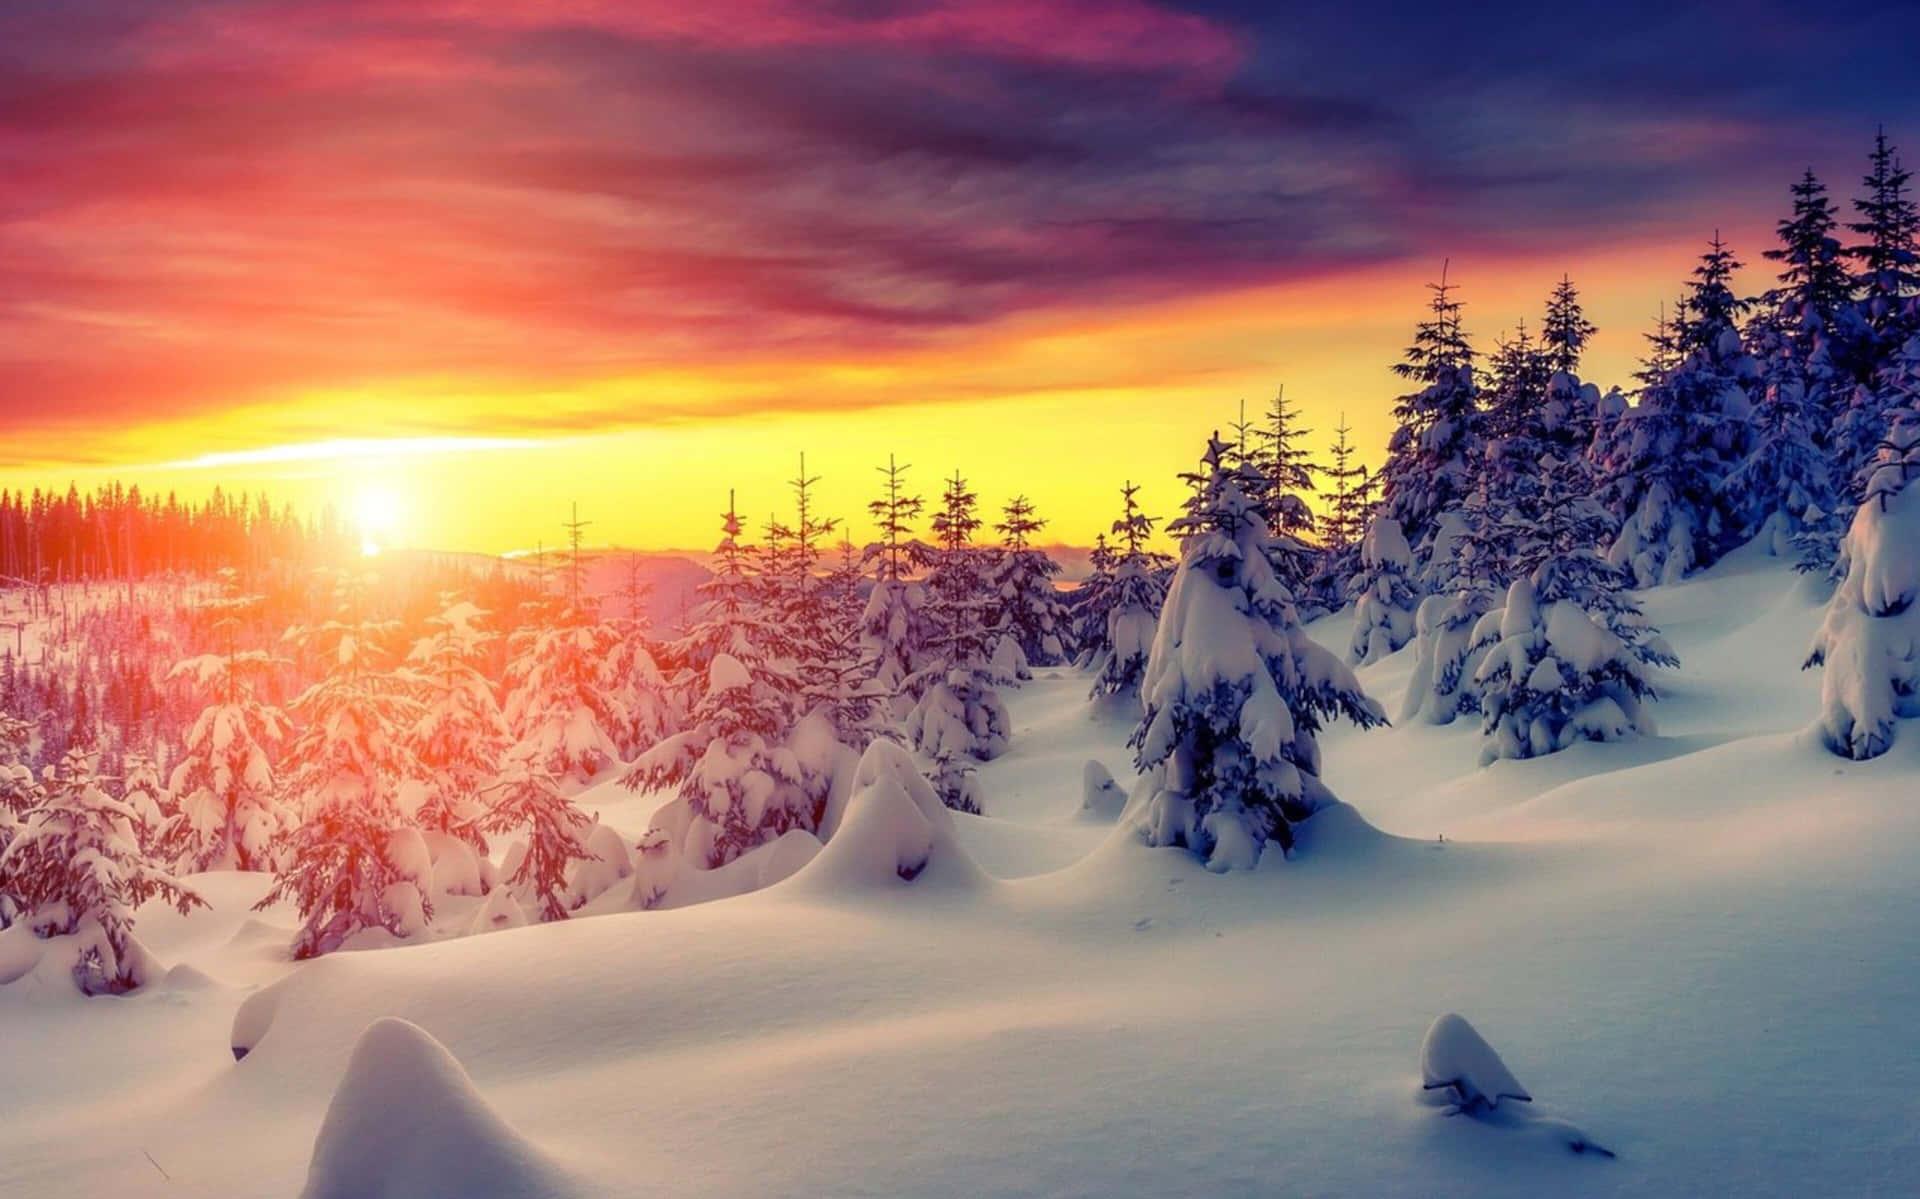 Download Enjoy the beauty of wintry landscapes with a stunning 4K